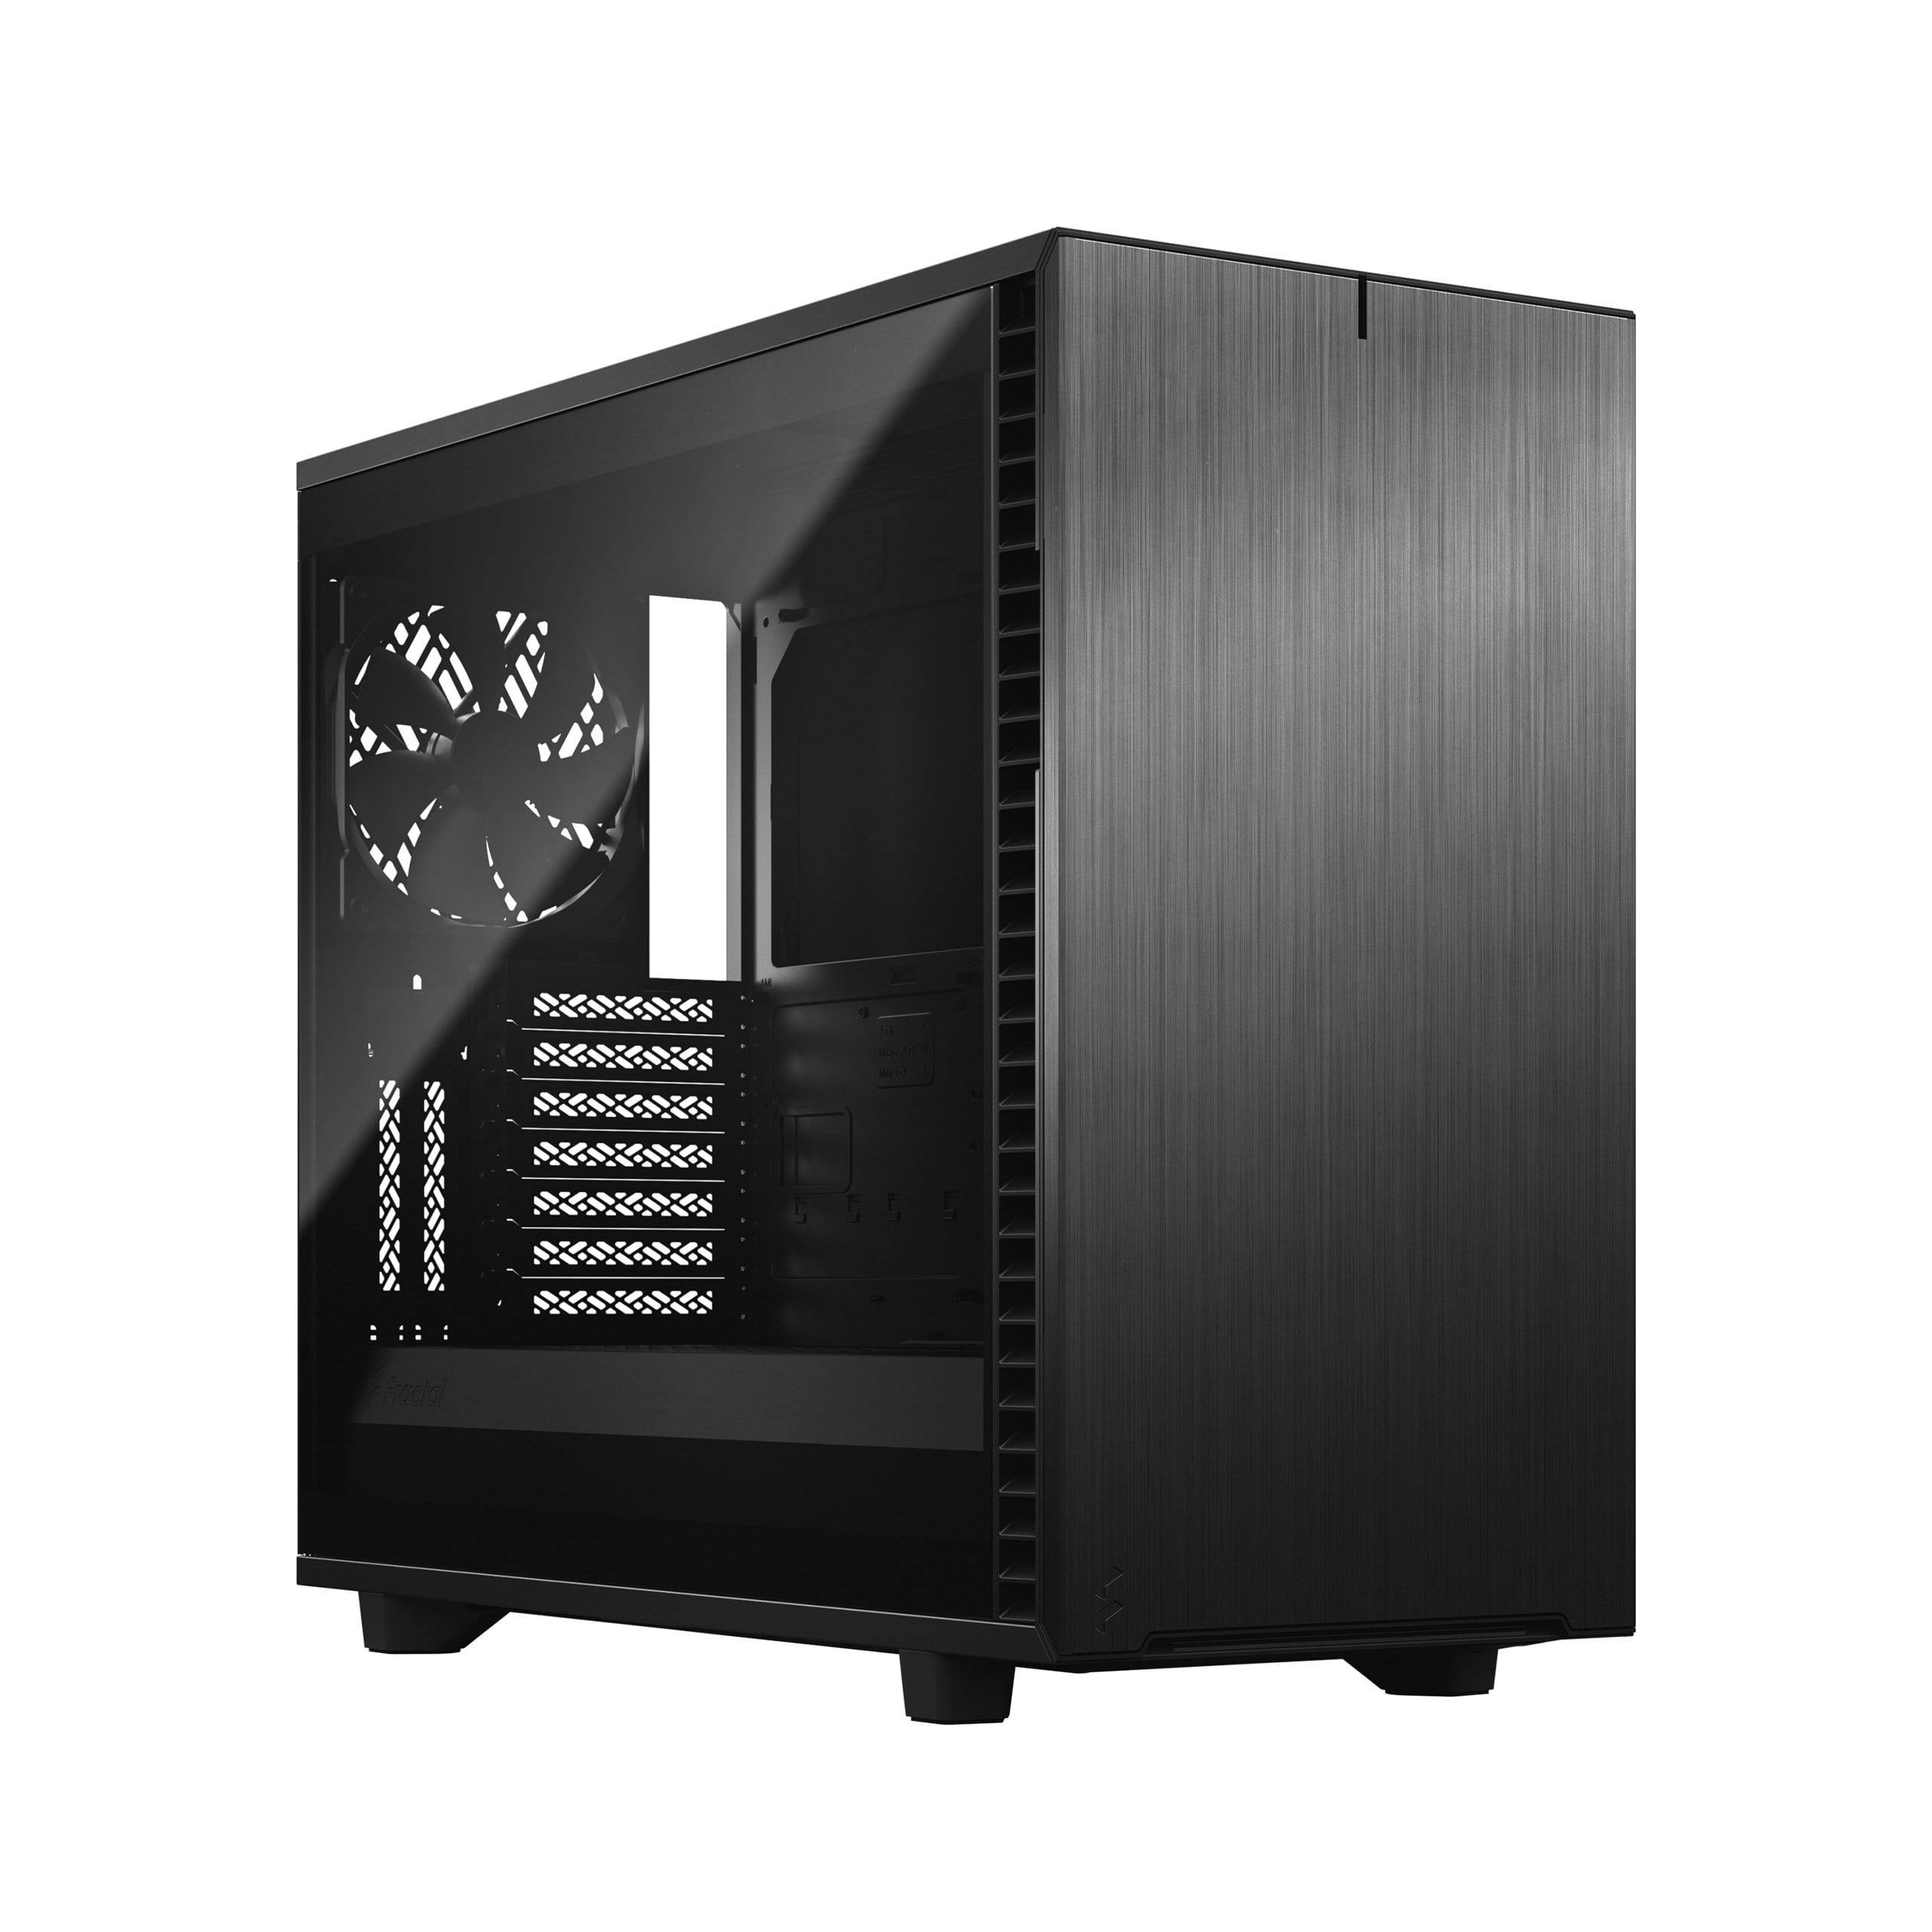 Fractal Style Pack Define 7 Tempered Glass Upgrade (B&W)